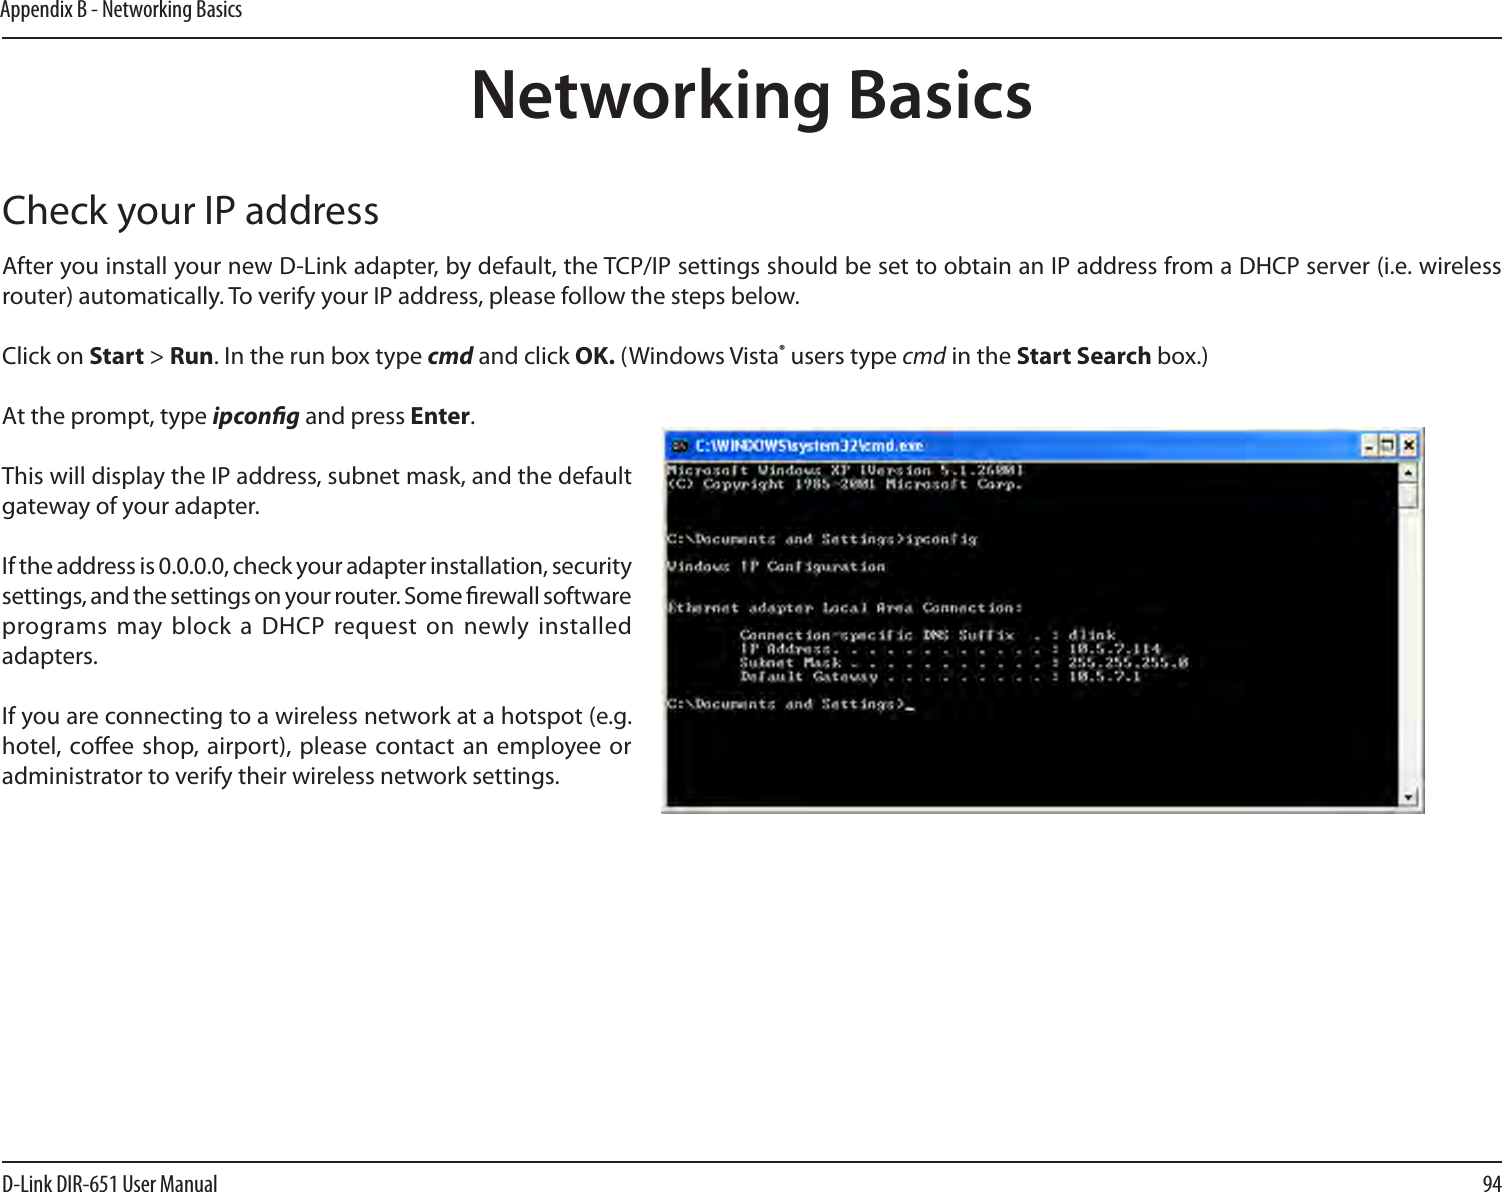 94D-Link DIR-651 User ManualAppendix B - Networking BasicsNetworking BasicsCheck your IP addressAfter you install your new D-Link adapter, by default, the TCP/IP settings should be set to obtain an IP address from a DHCP server (i.e. wireless router) automatically. To verify your IP address, please follow the steps below.Click on Start &gt; Run. In the run box type cmd and click OK. (Windows Vista® users type cmd in the Start Search box.)At the prompt, type ipcong and press Enter.This will display the IP address, subnet mask, and the default gateway of your adapter.If the address is 0.0.0.0, check your adapter installation, security settings, and the settings on your router. Some rewall software programs may block  a DHCP request on  newly installed adapters. If you are connecting to a wireless network at a hotspot (e.g. hotel, coee shop, airport), please  contact an employee  or administrator to verify their wireless network settings.